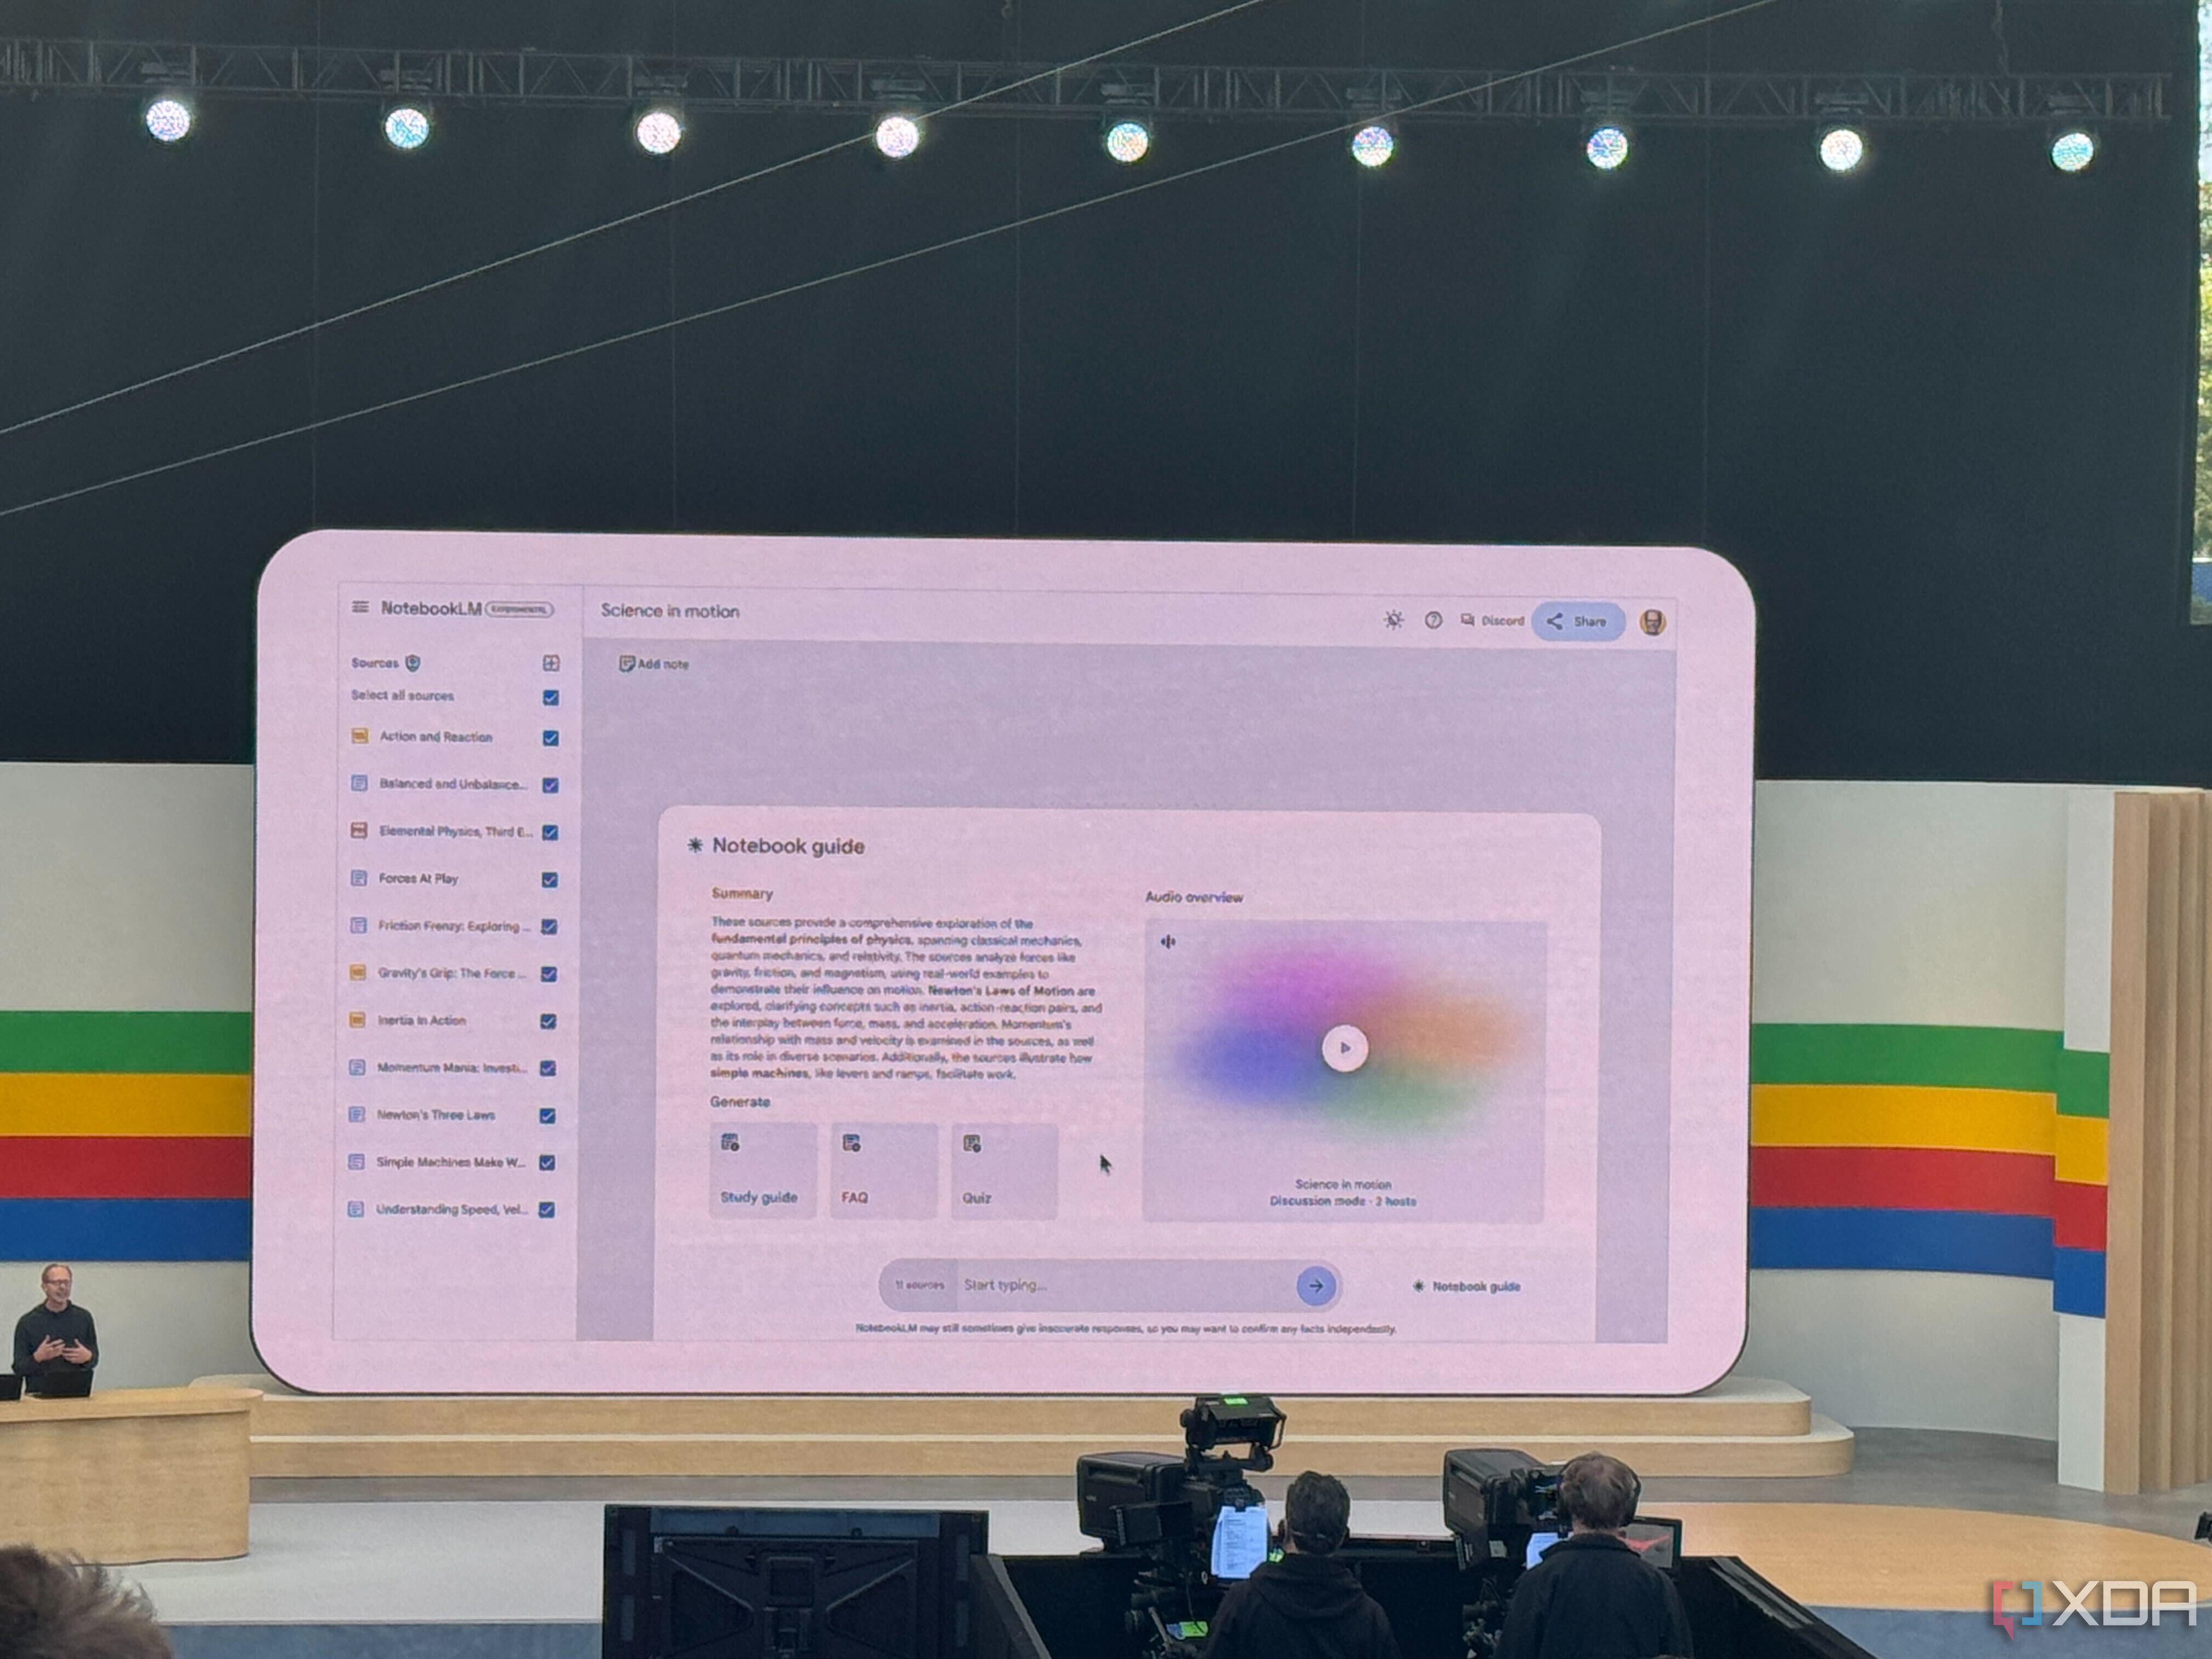 Google's Gemini 1.5 Pro lets you discuss study notes with AI using your voice